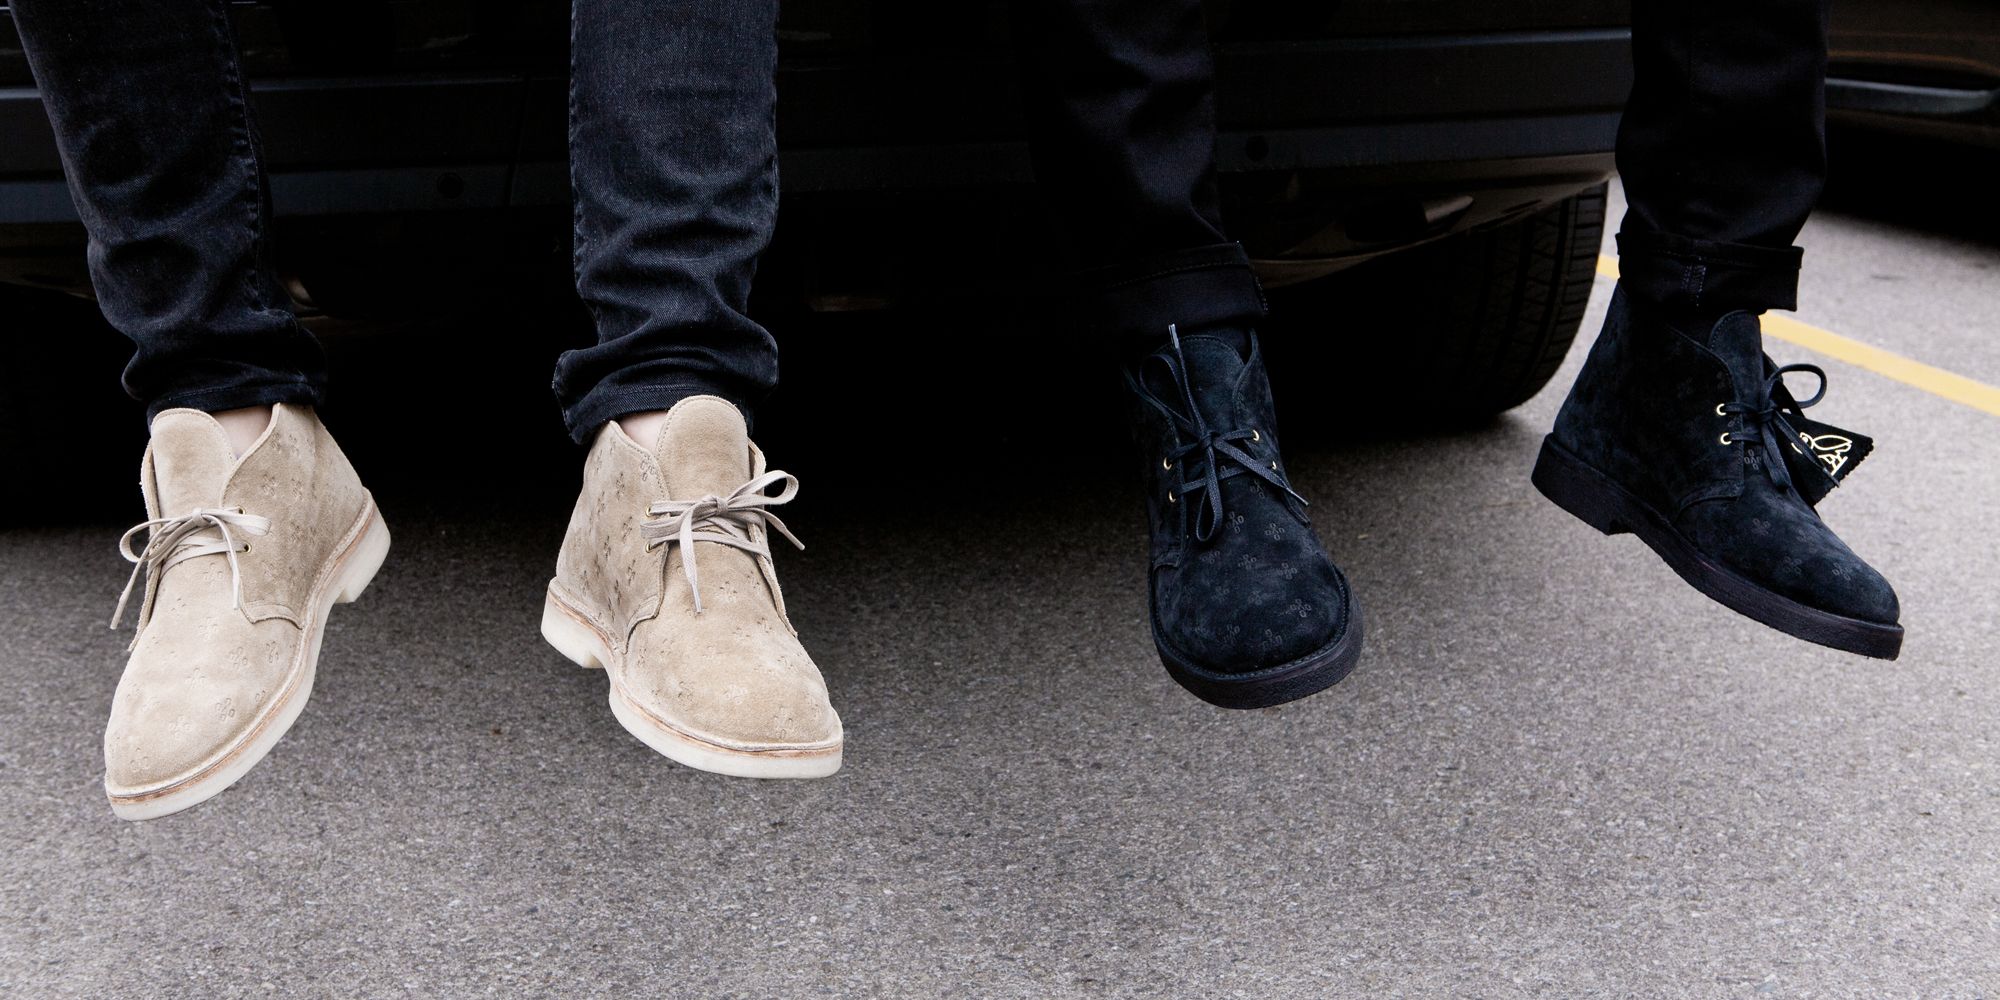 Drake's OVO Clarks Boots Have Finally Arrived